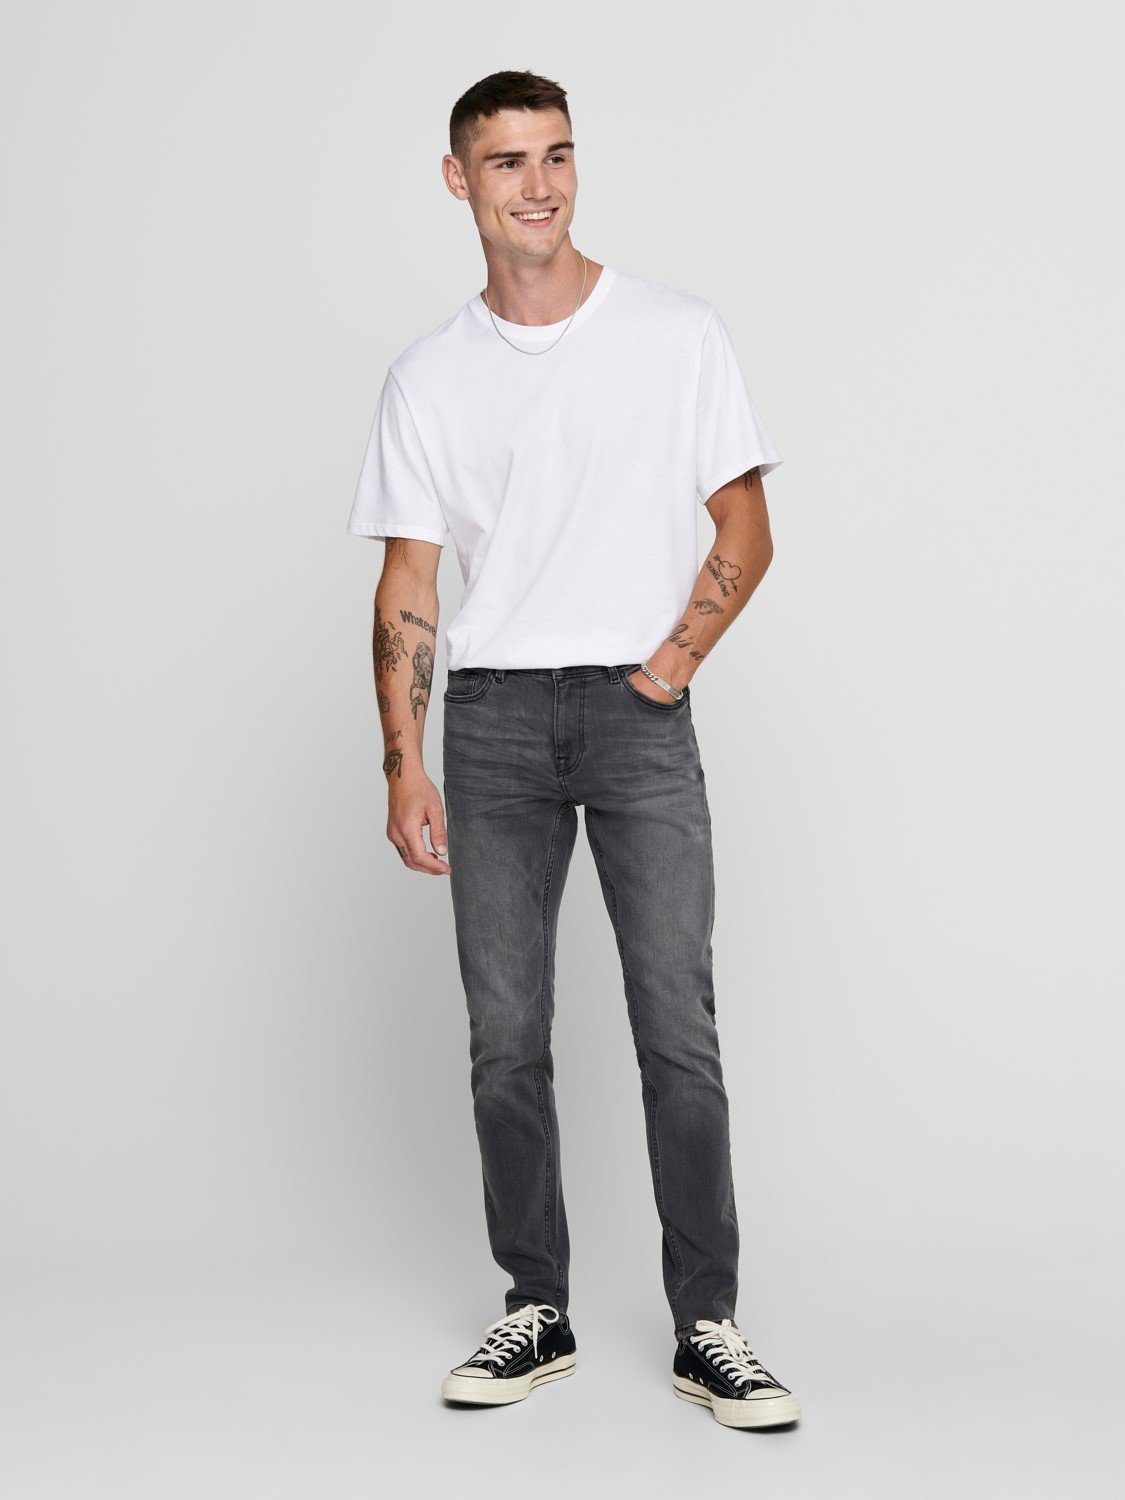 Washed Stoned (1-tlg) Hose Basic Slim-fit-Jeans ONSWARP SONS in Fit Grau Skinny Jeans Pants Denim ONLY & 3977